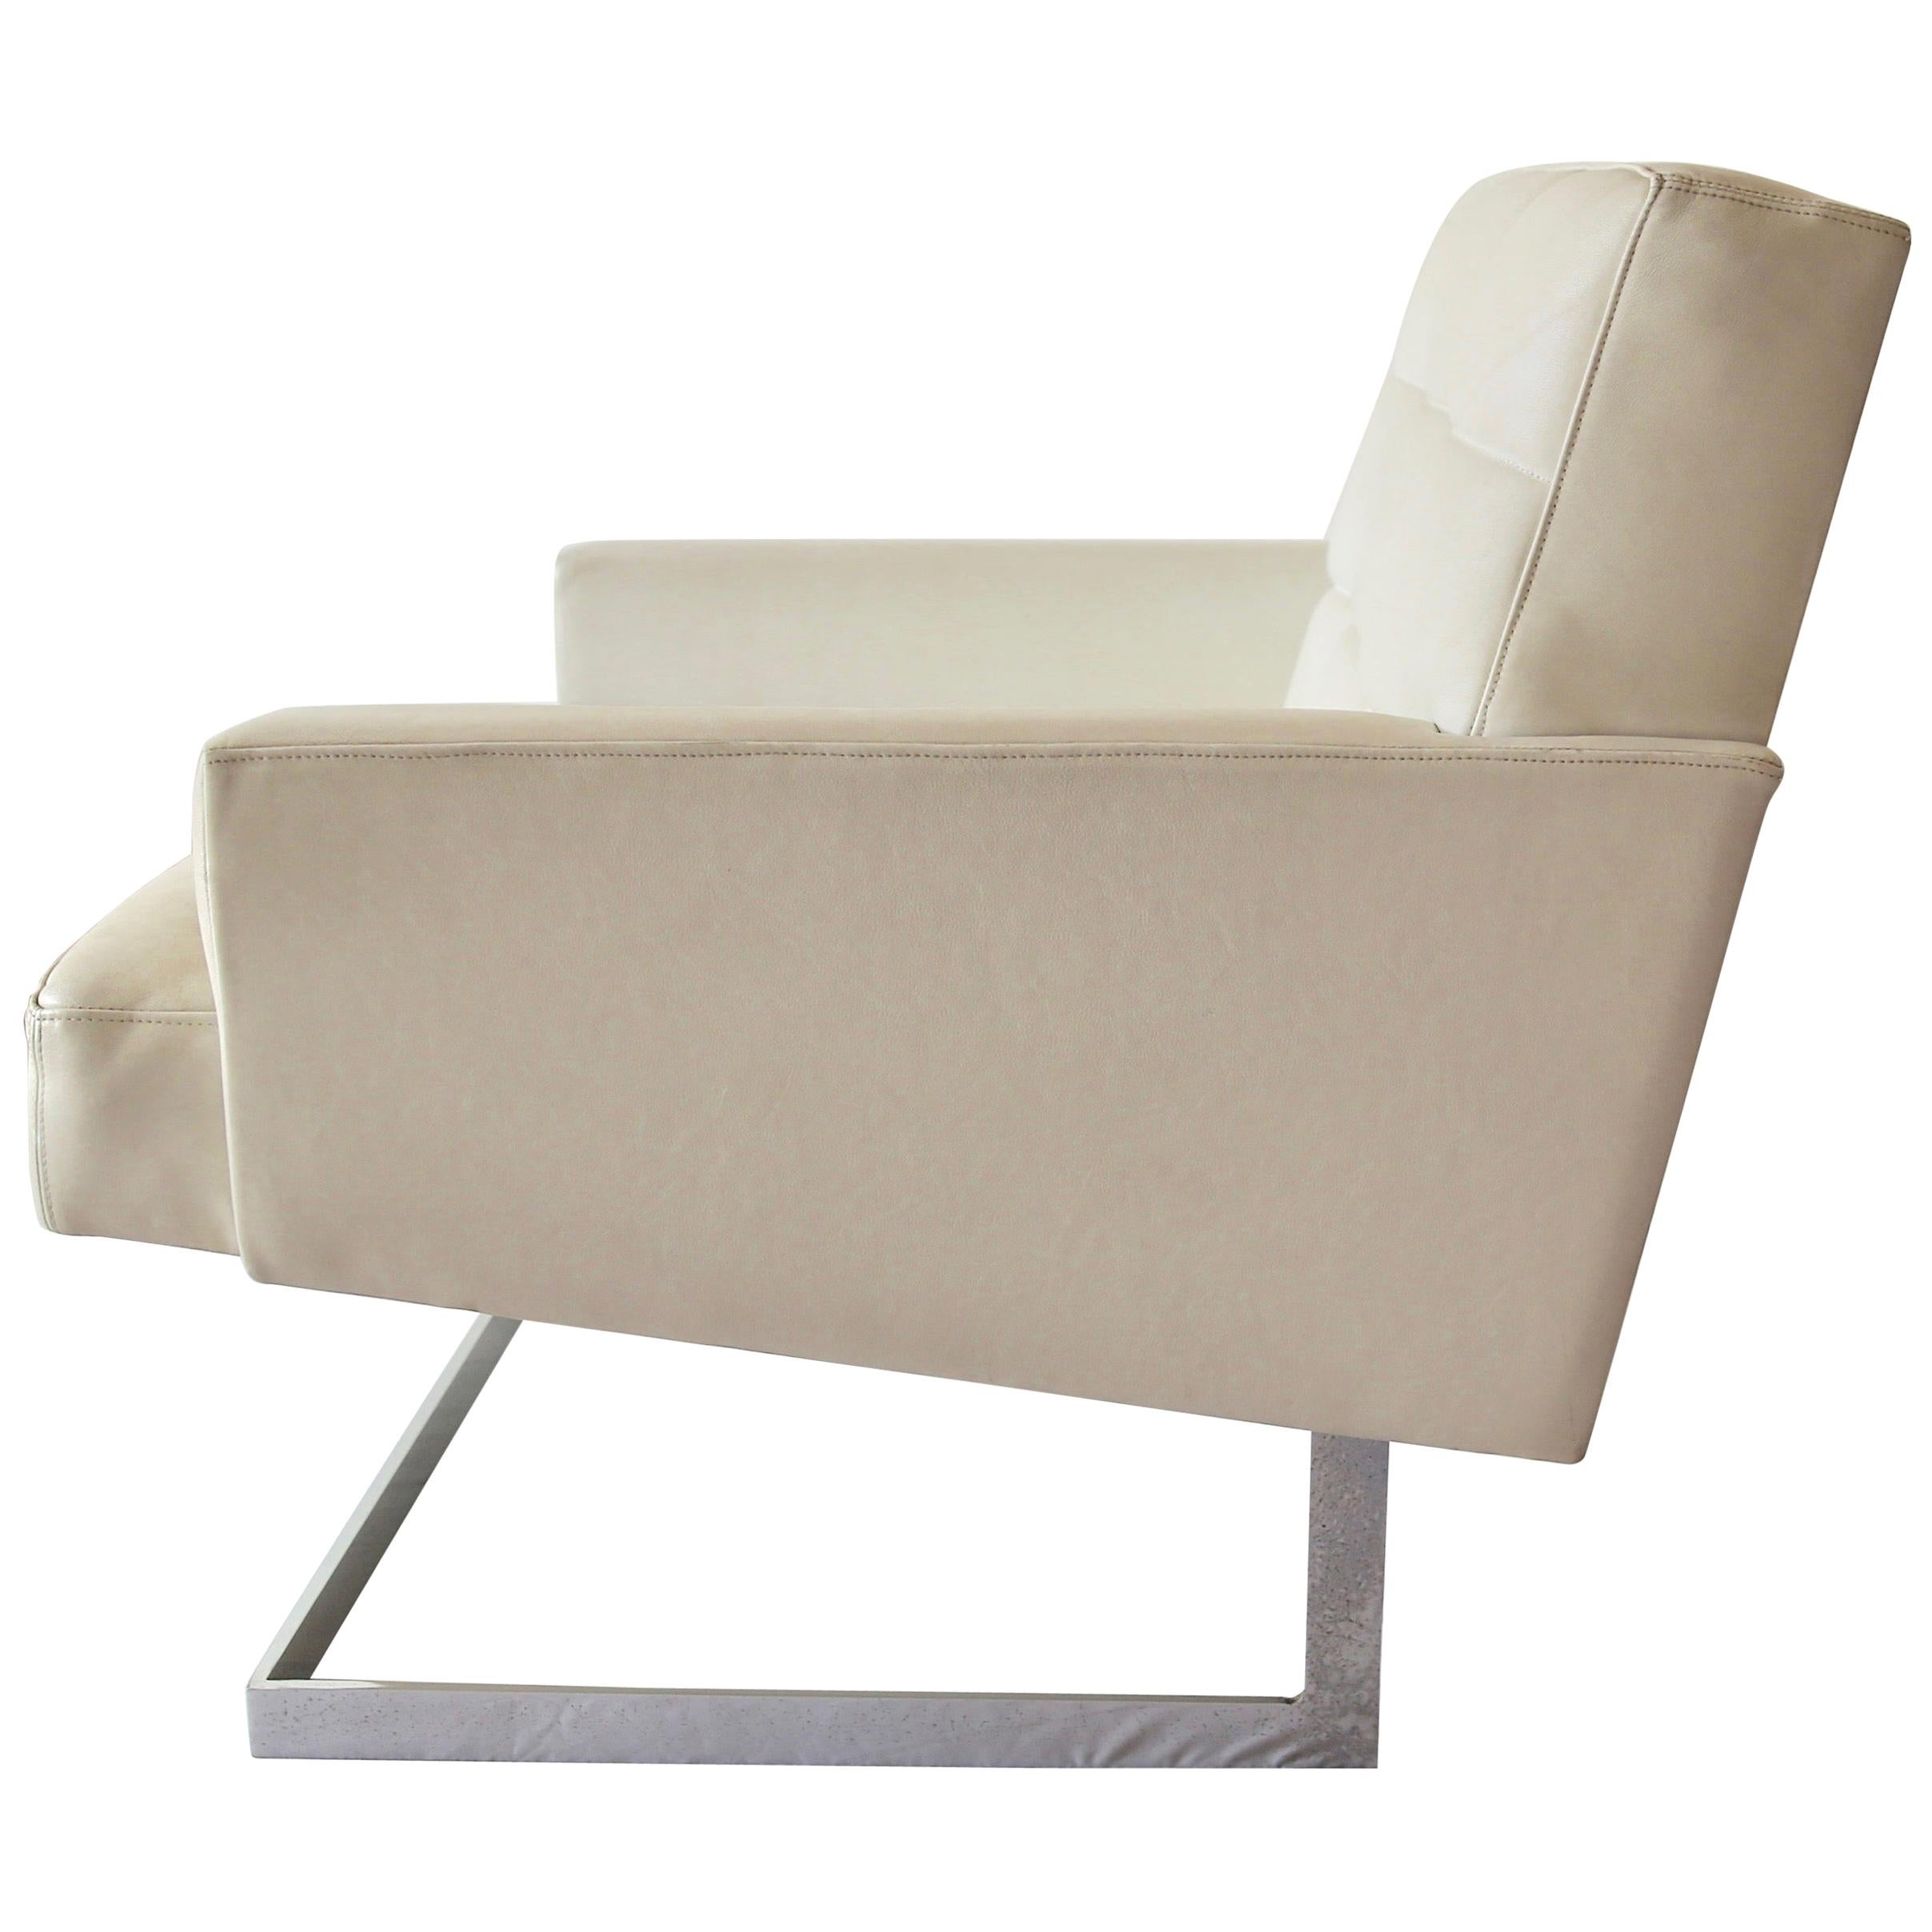 Pair of Mid-Modern Lounge Armchairs in Leather, 1960s For Sale